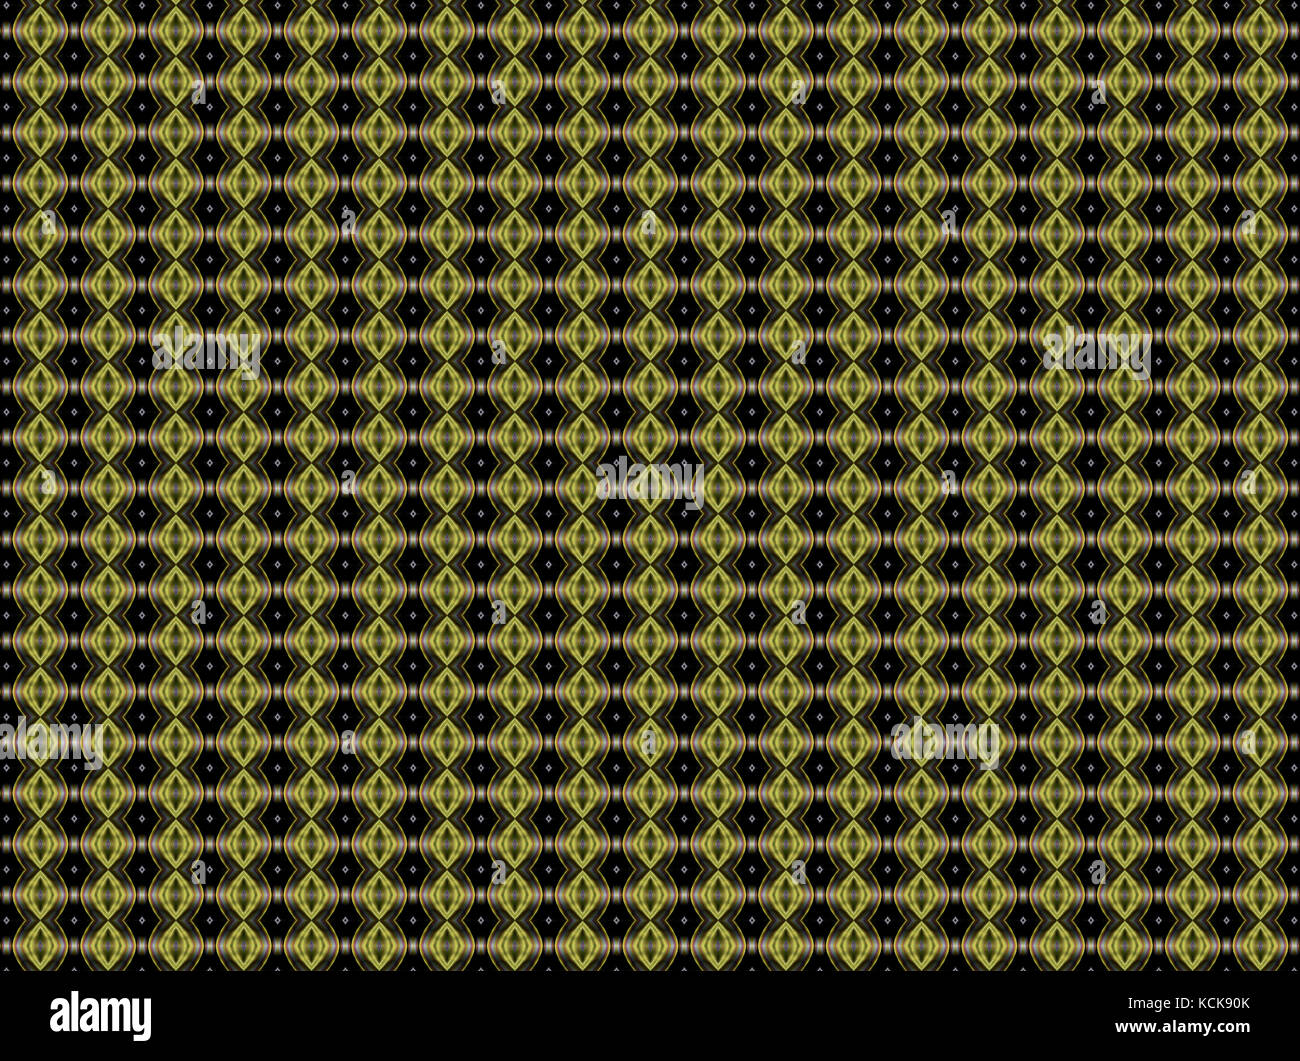 Wallpaper Pattern in Black and Yellow Stock Photo